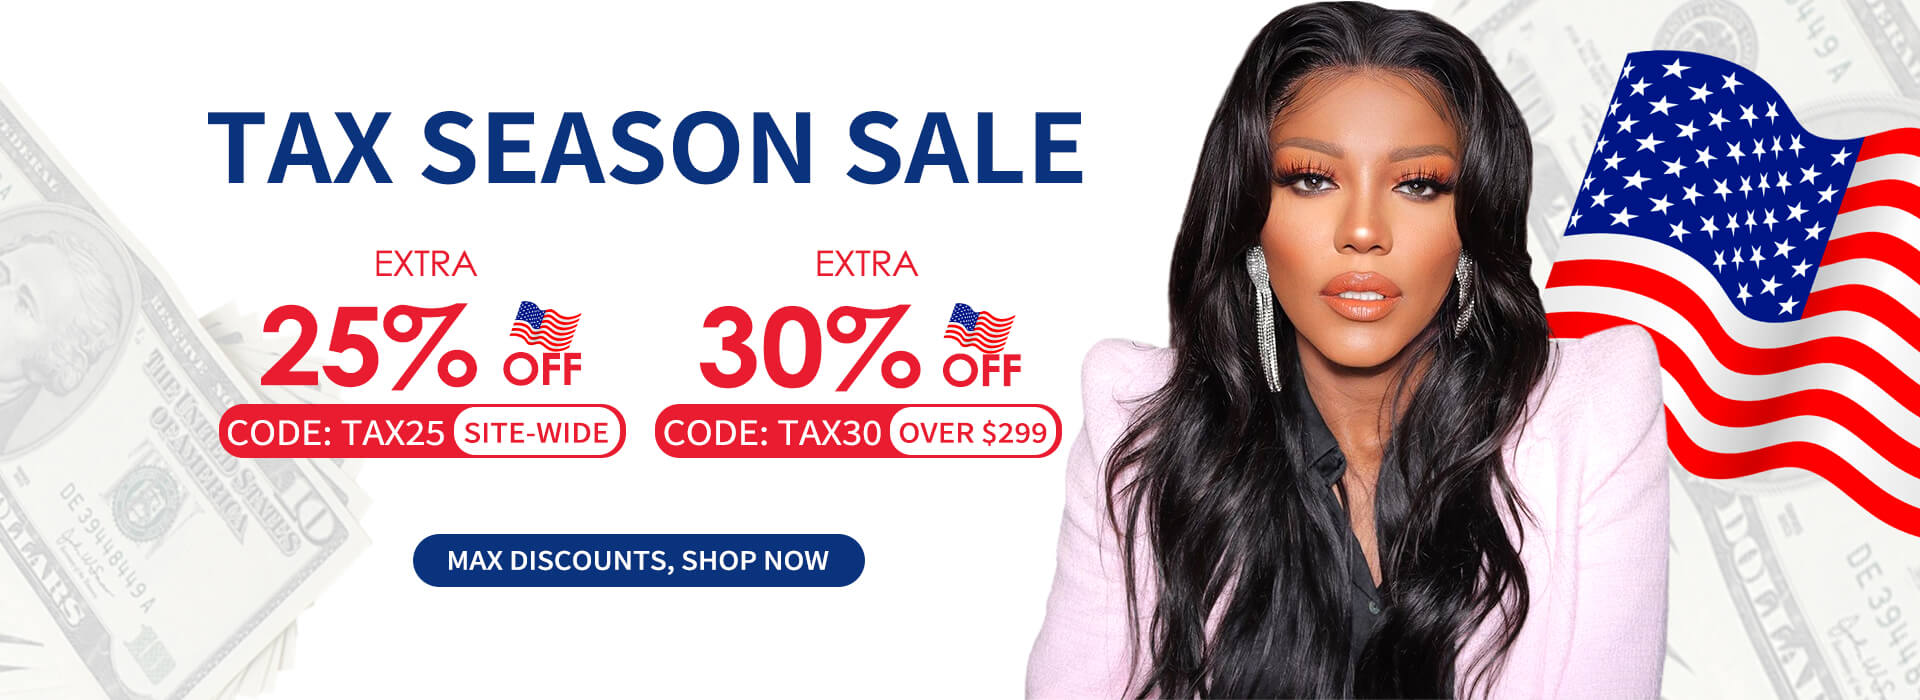 tax refund season up to 80% off (2)